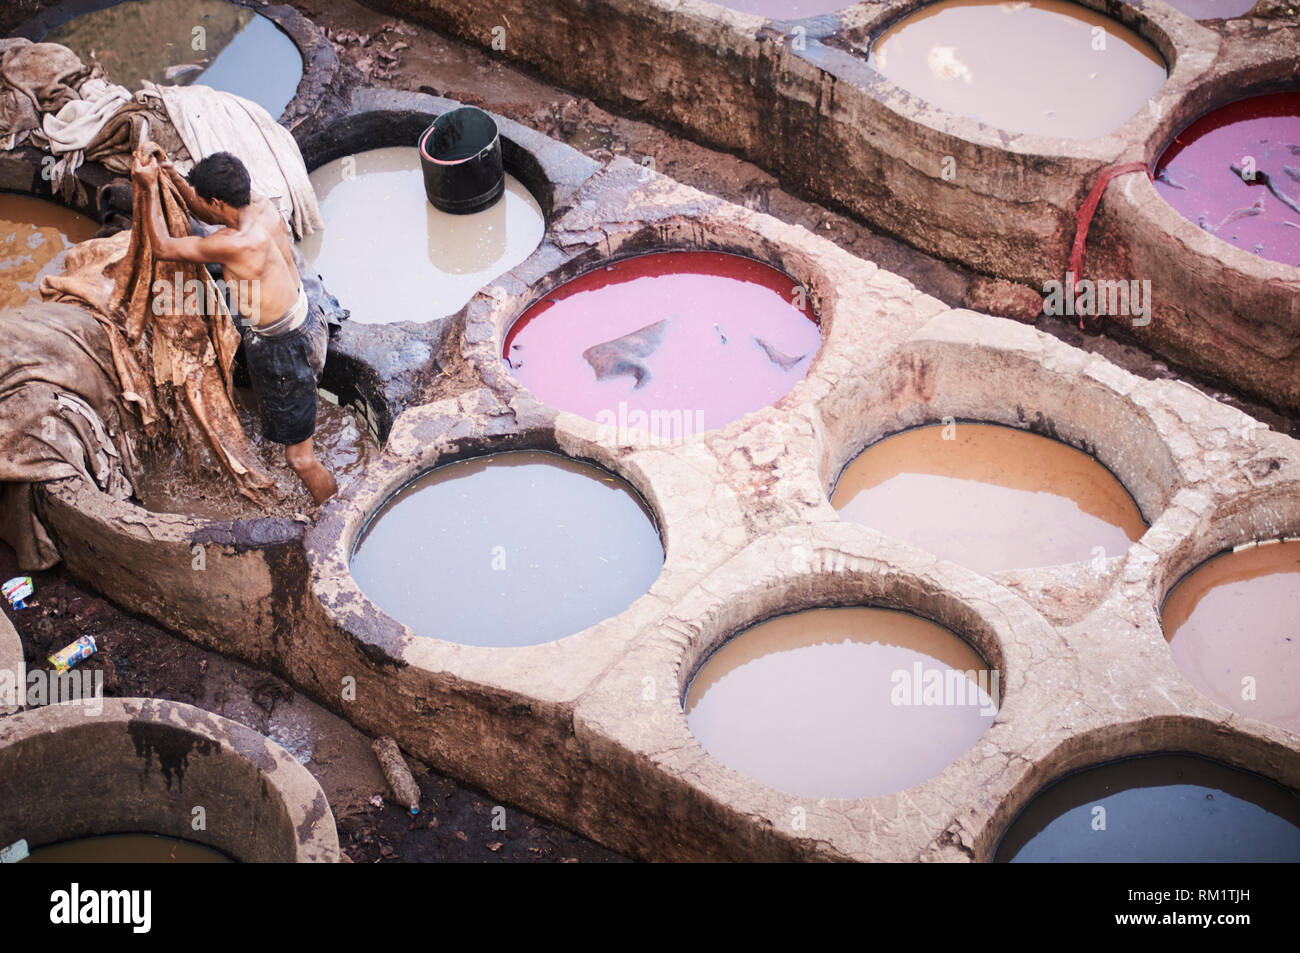 Men in the Chouara Tannery dye and treat leather hides for the production of leather goods, in the Fes al Bali medina in Fes, Morocco. Stock Photo